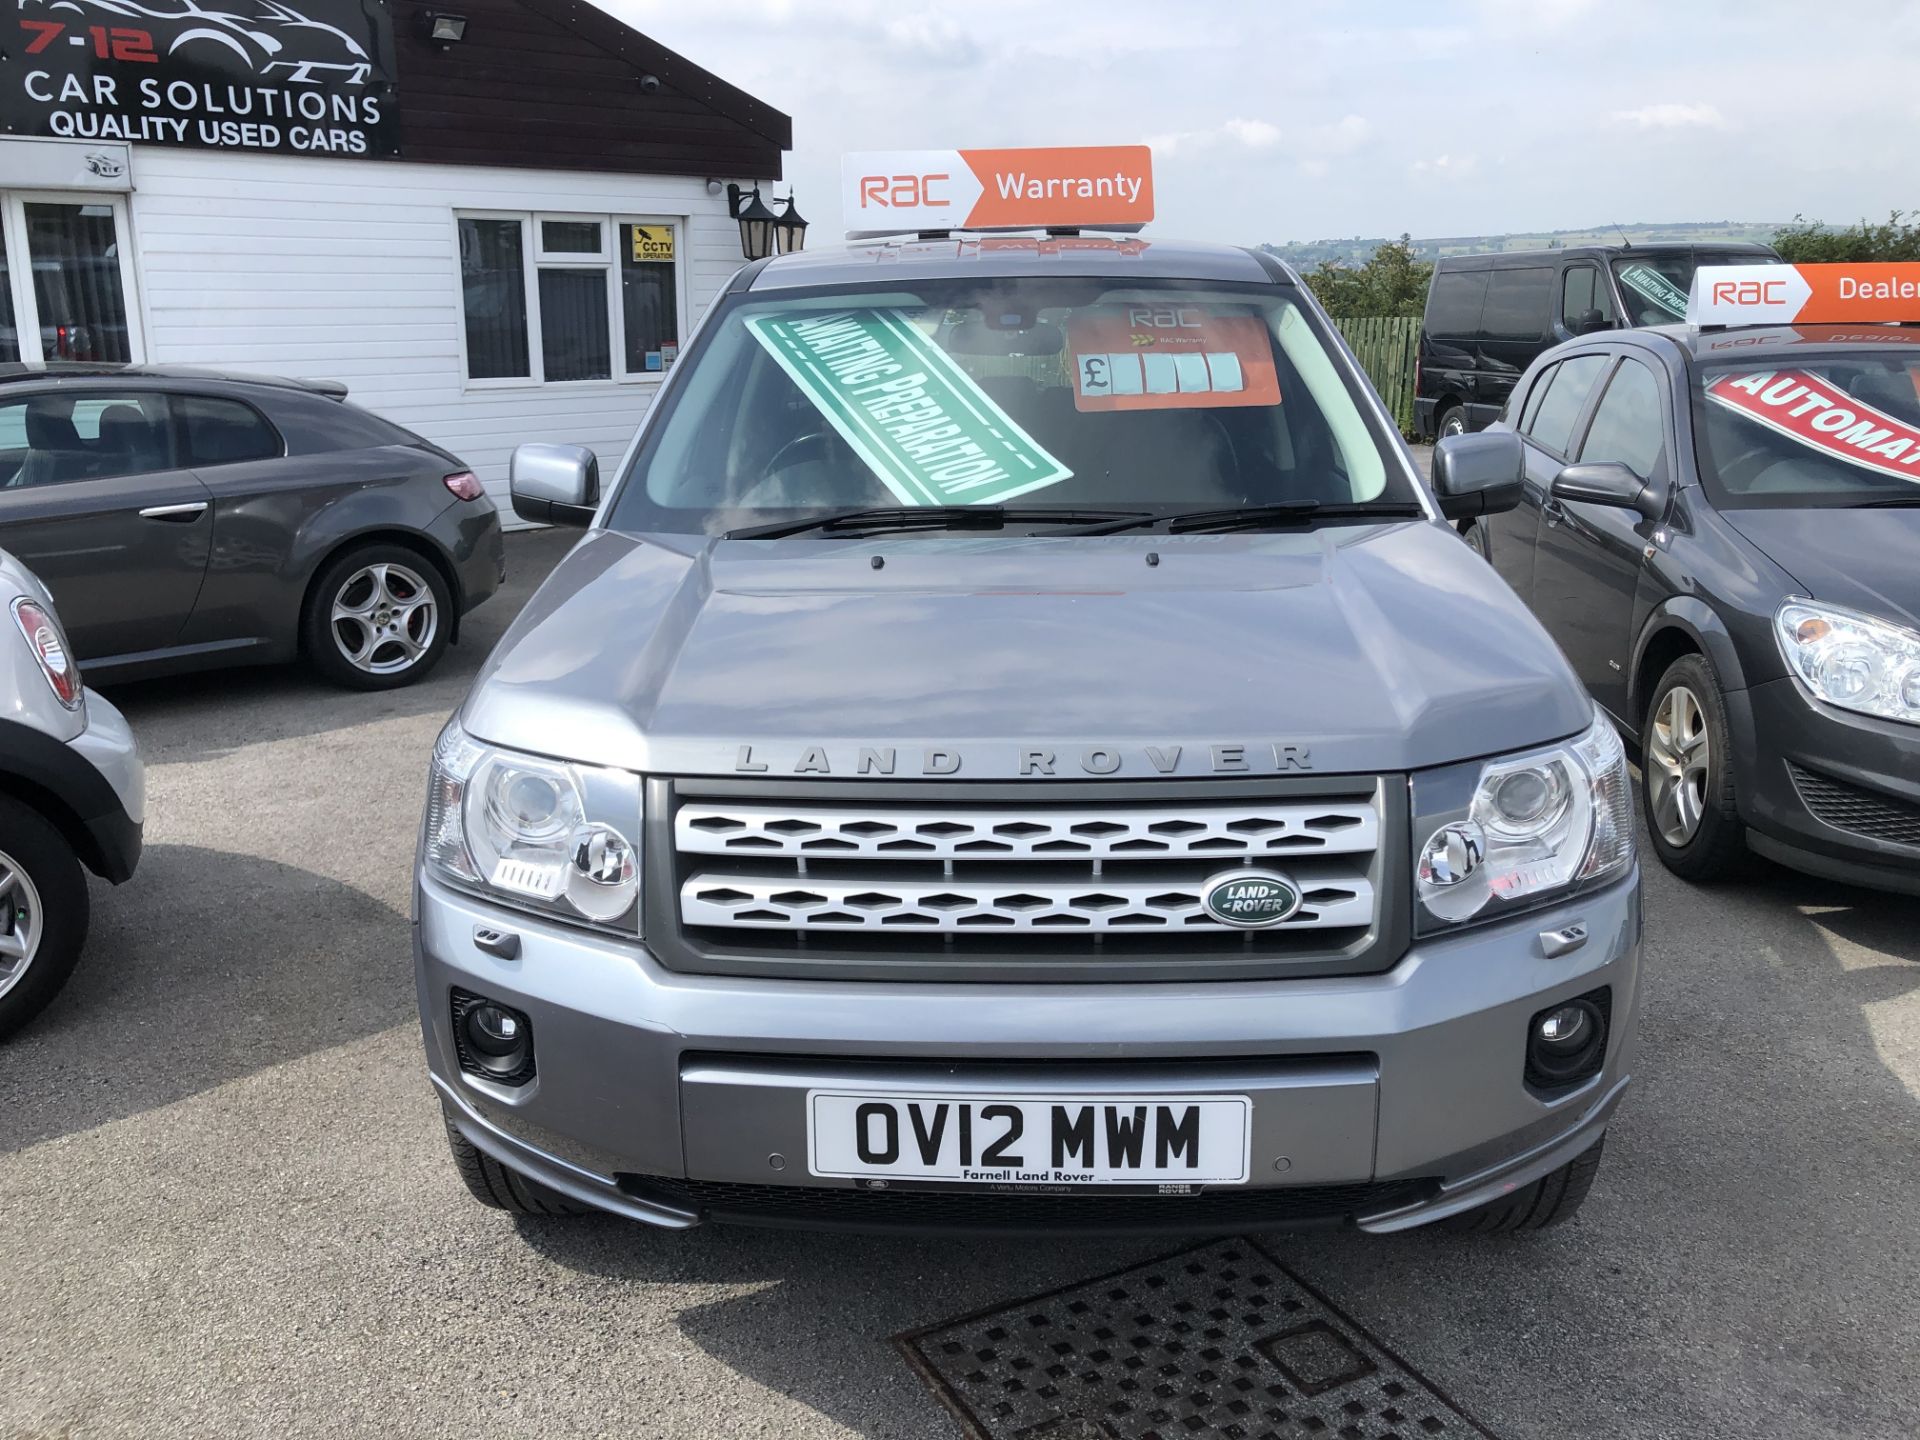 2012/12 REG LAND ROVER FREELANDER XS SD4 AUTO 2.2 DIESEL GREY, SHOWING 2 FORMER KEEPERS *NO VAT* - Image 2 of 21